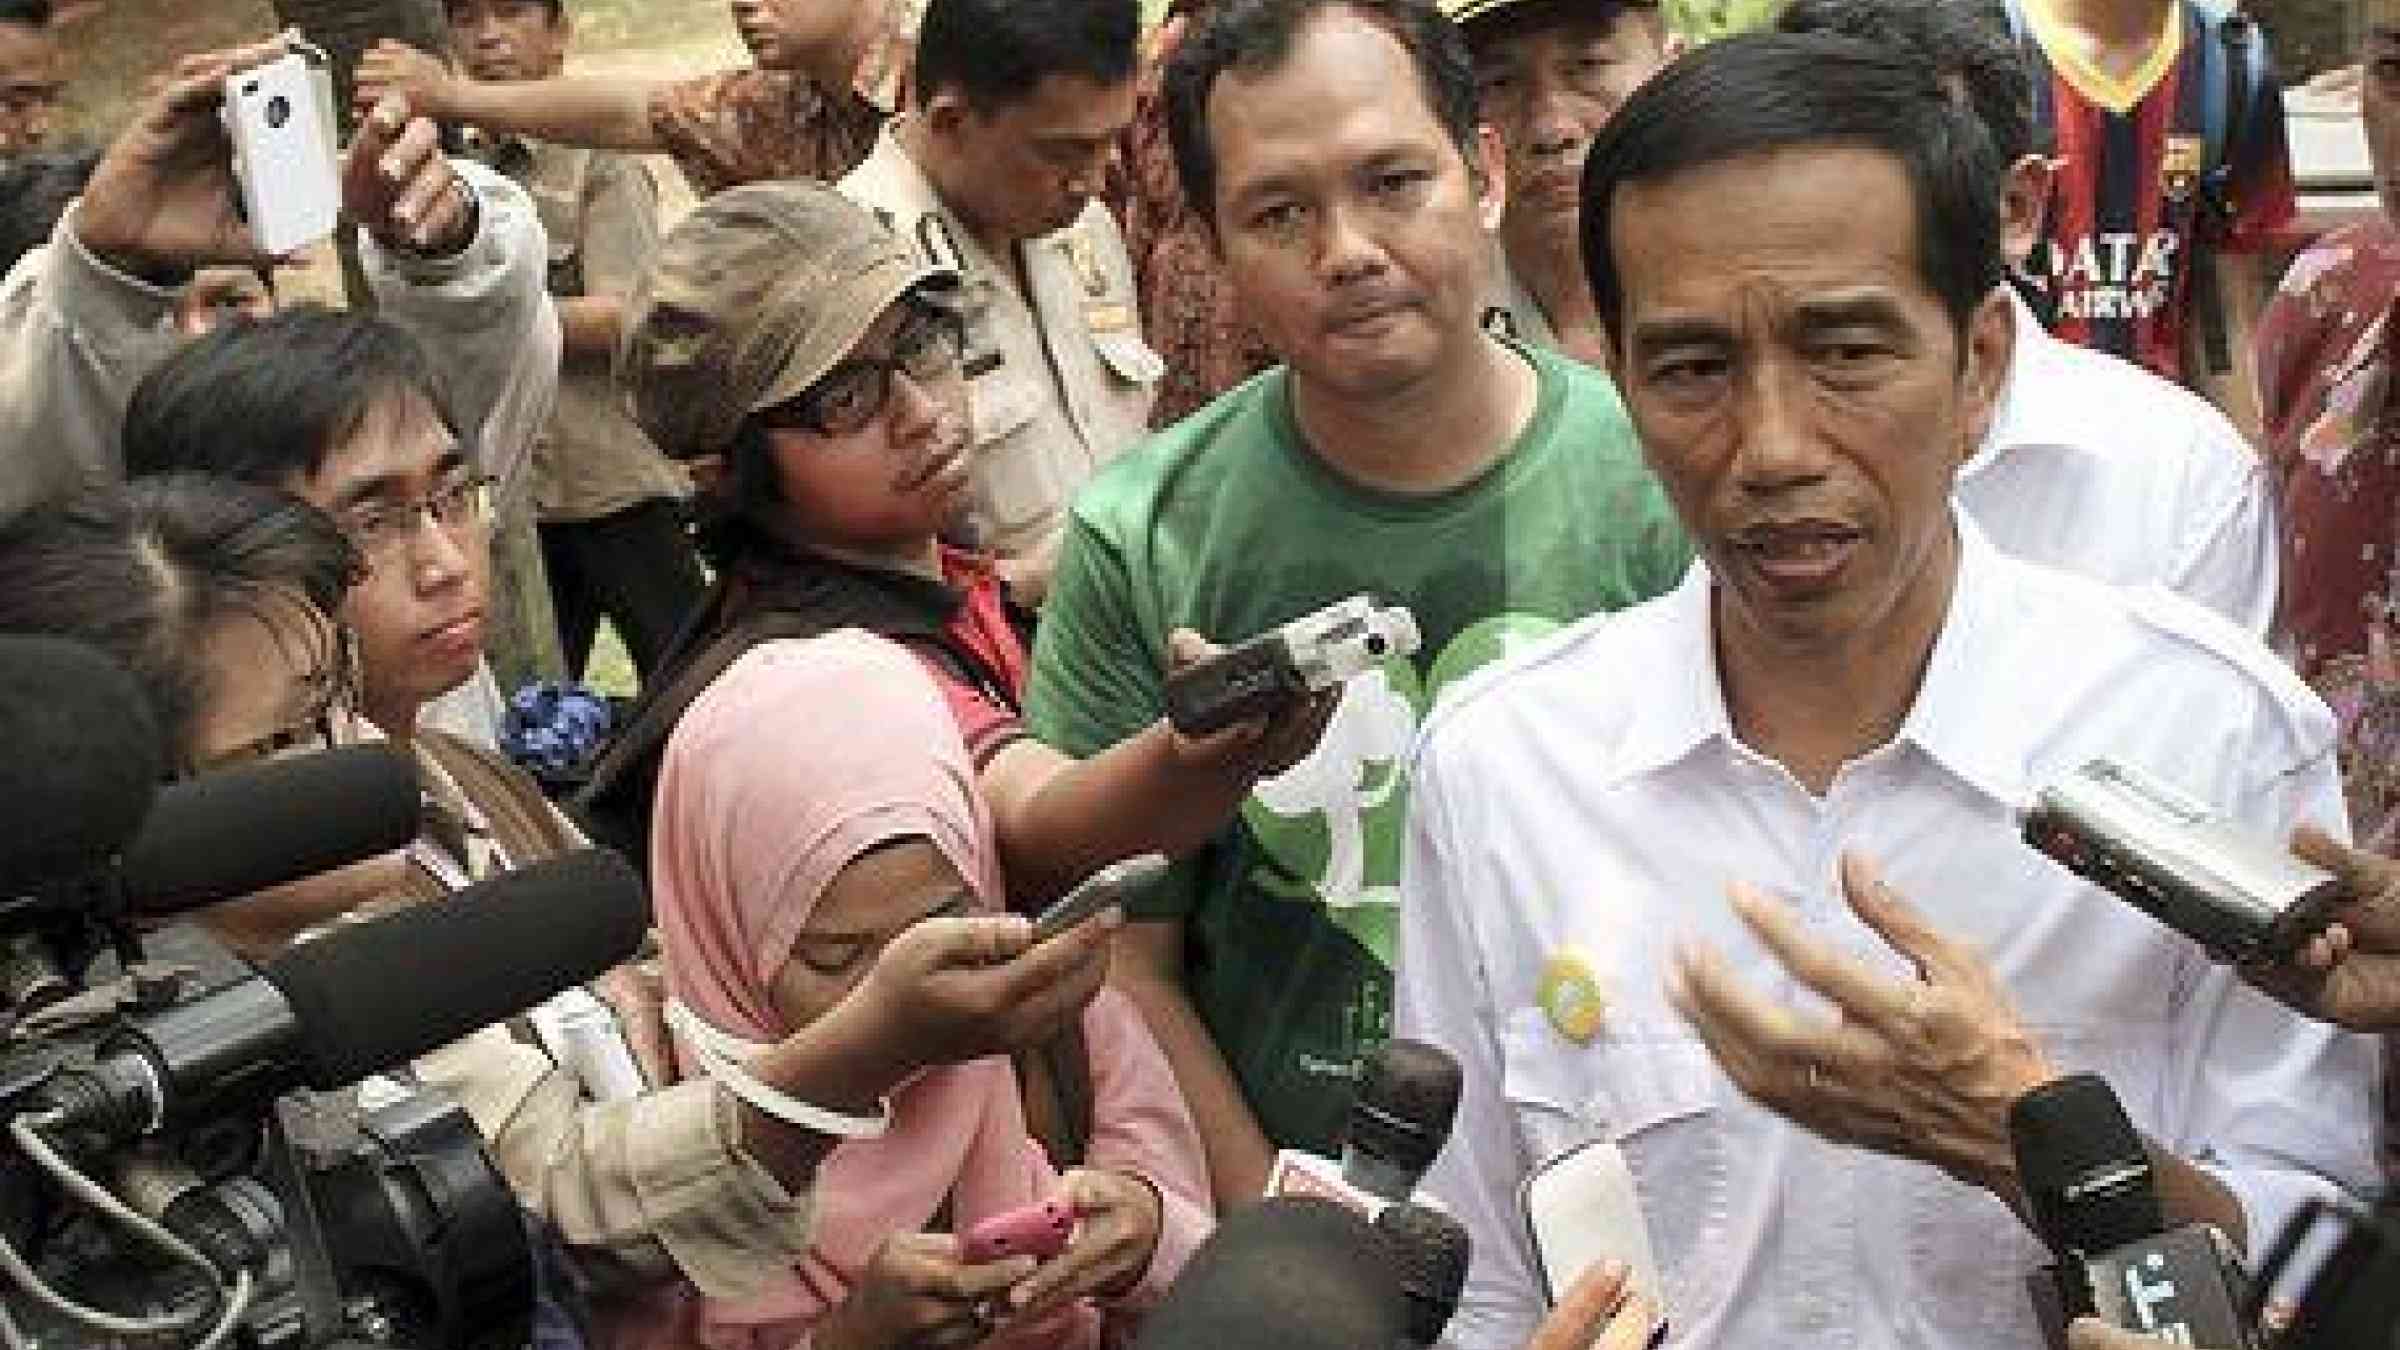 President Joko Widodo plans to launch a National Disaster Risk Reduction Movement in October (Photo: Flickr)